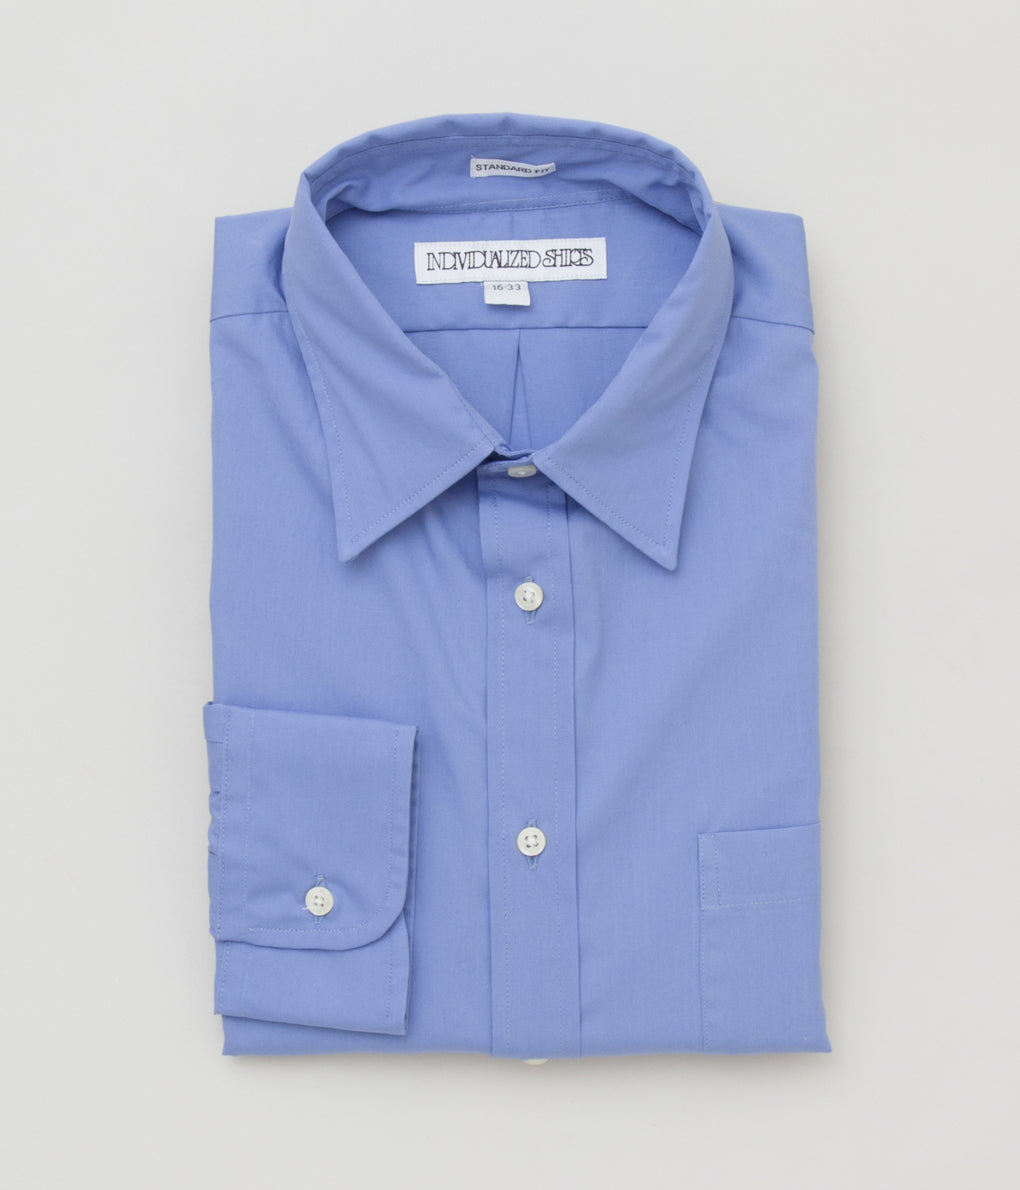 INDIVIDUALIZED SHIRTS "POPLIN (STANDARD FIT TRADITIONAL COLLAR SHIRT)"(FRENCH BLUE)